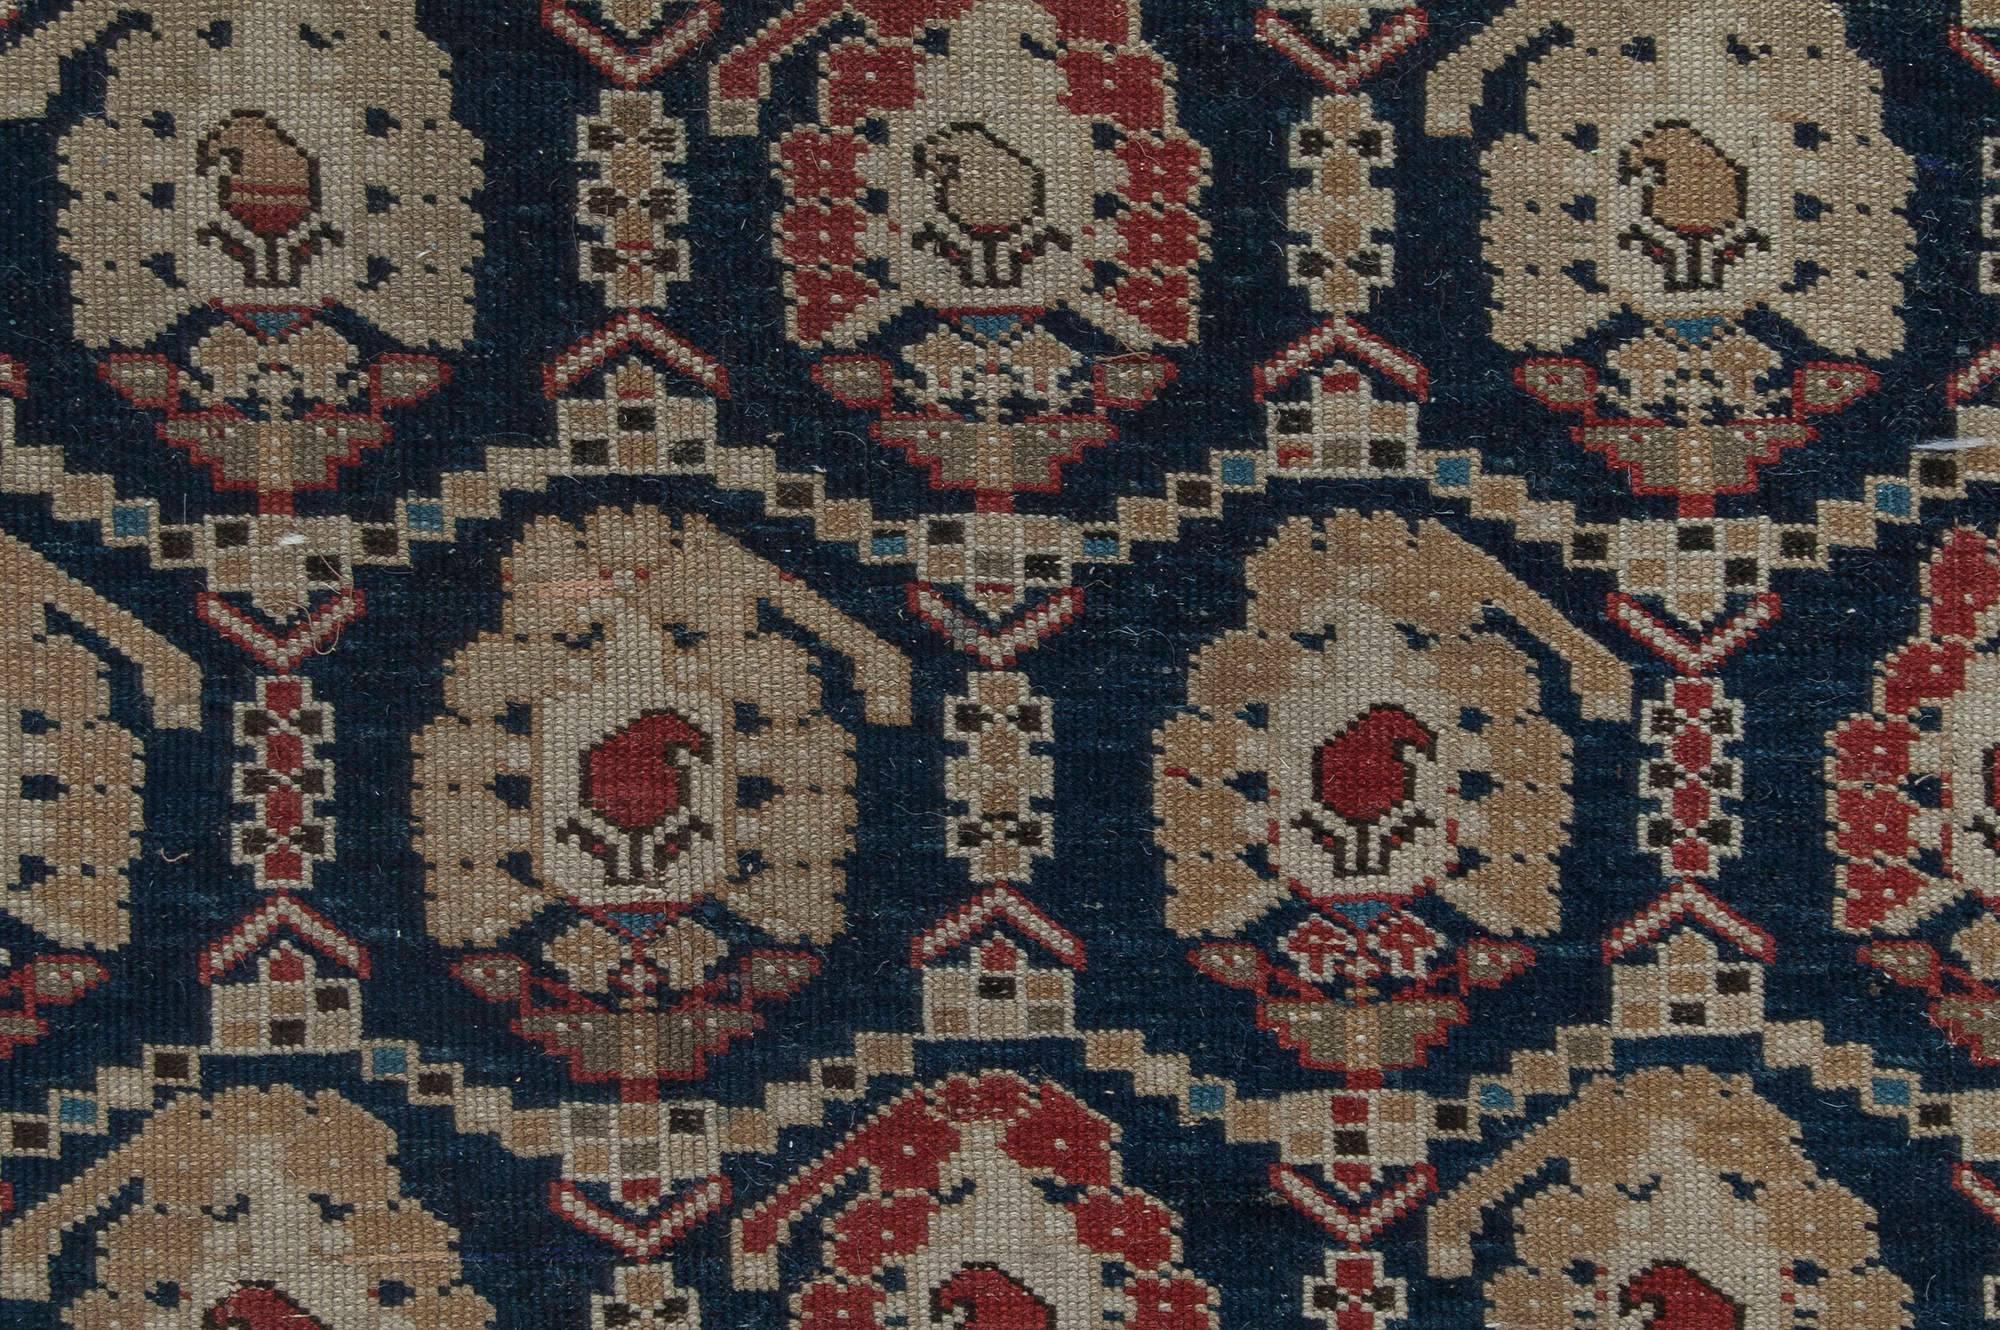 19th Century Caucasian Red, Brown, Black, Blue Handwoven Wool Rug
Size: 5'1